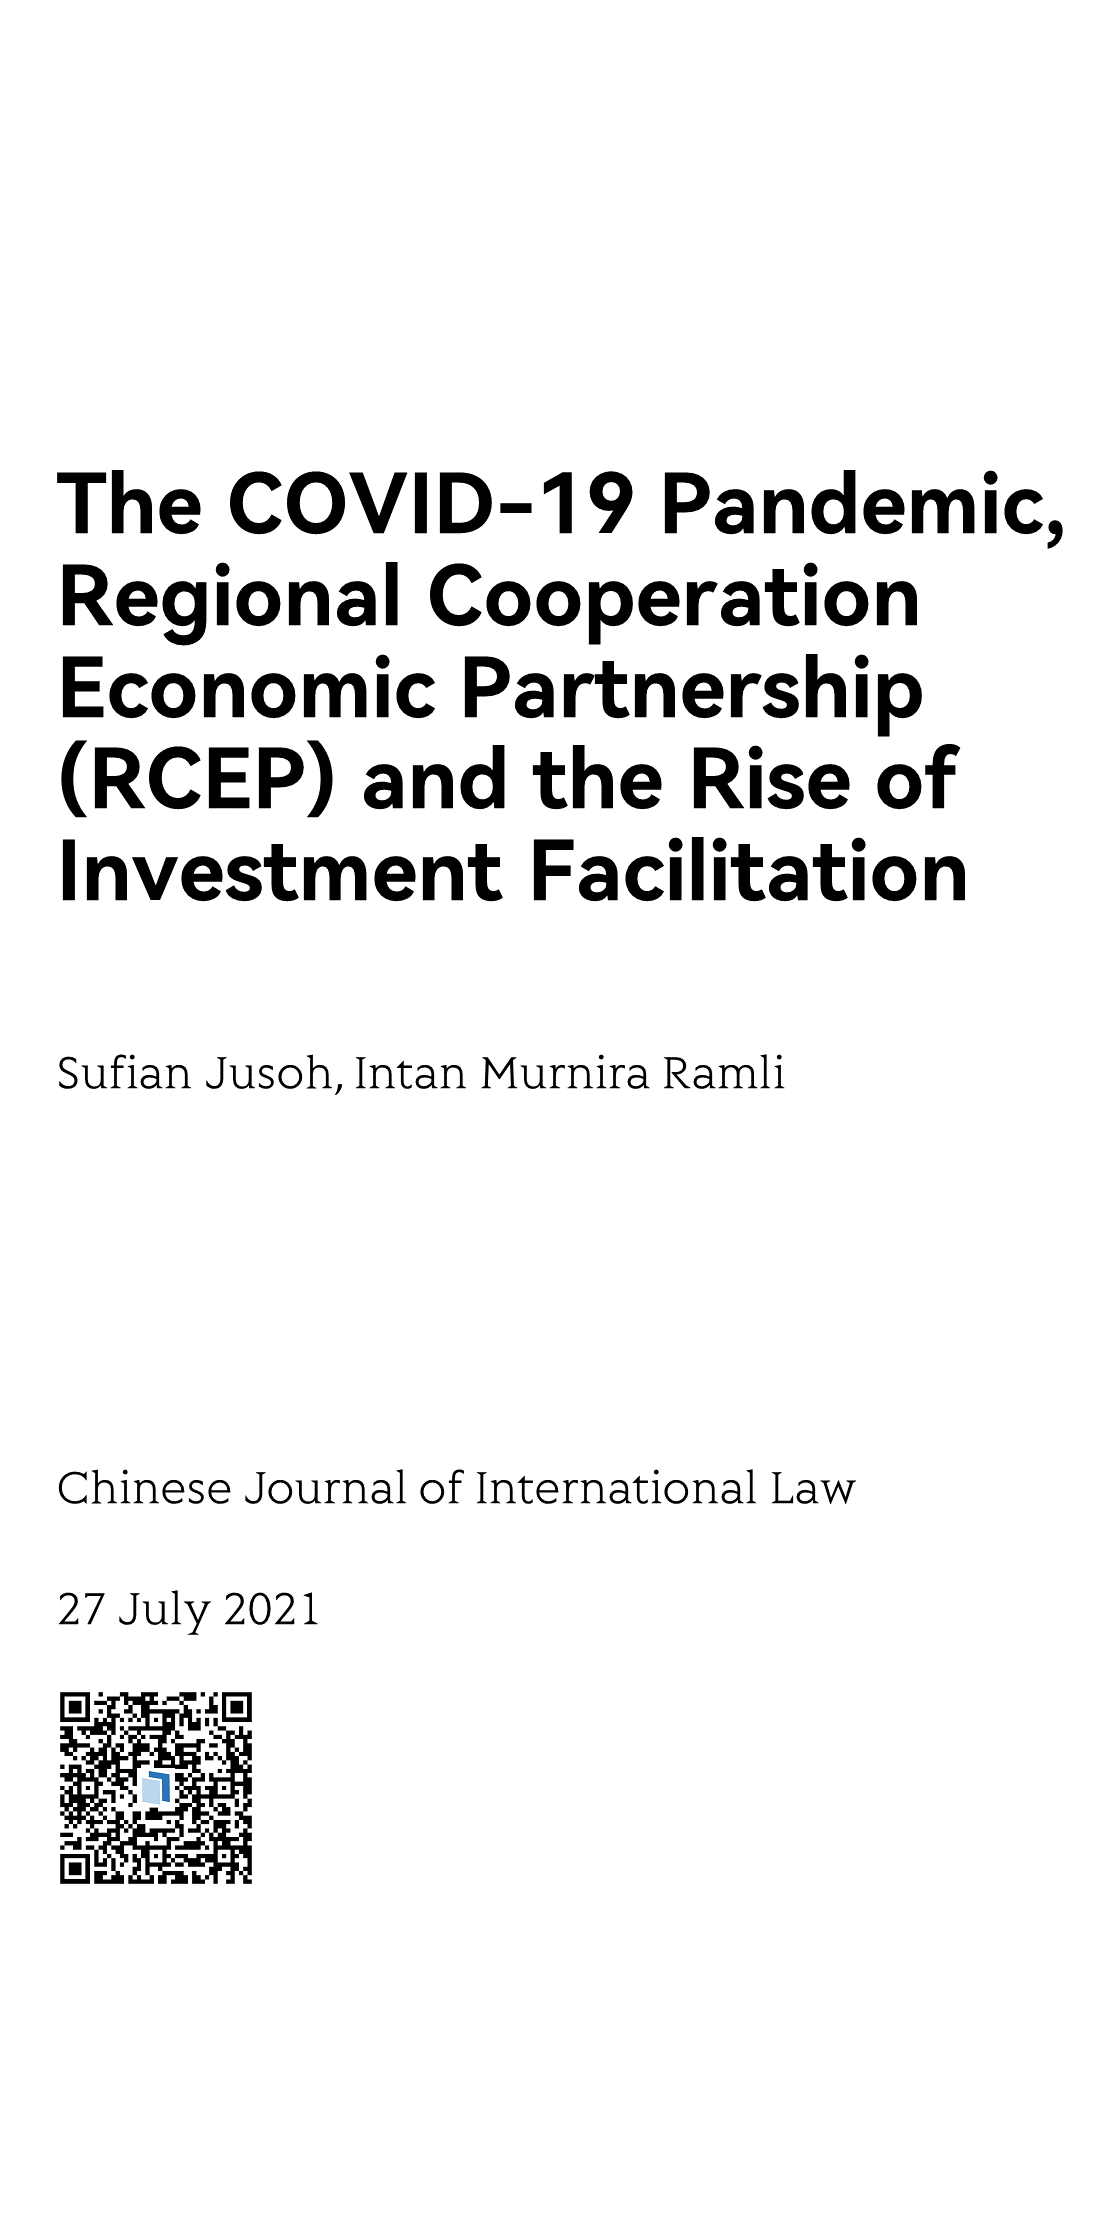 The COVID-19 Pandemic, Regional Cooperation Economic Partnership (RCEP) and the Rise of Investment Facilitation_1